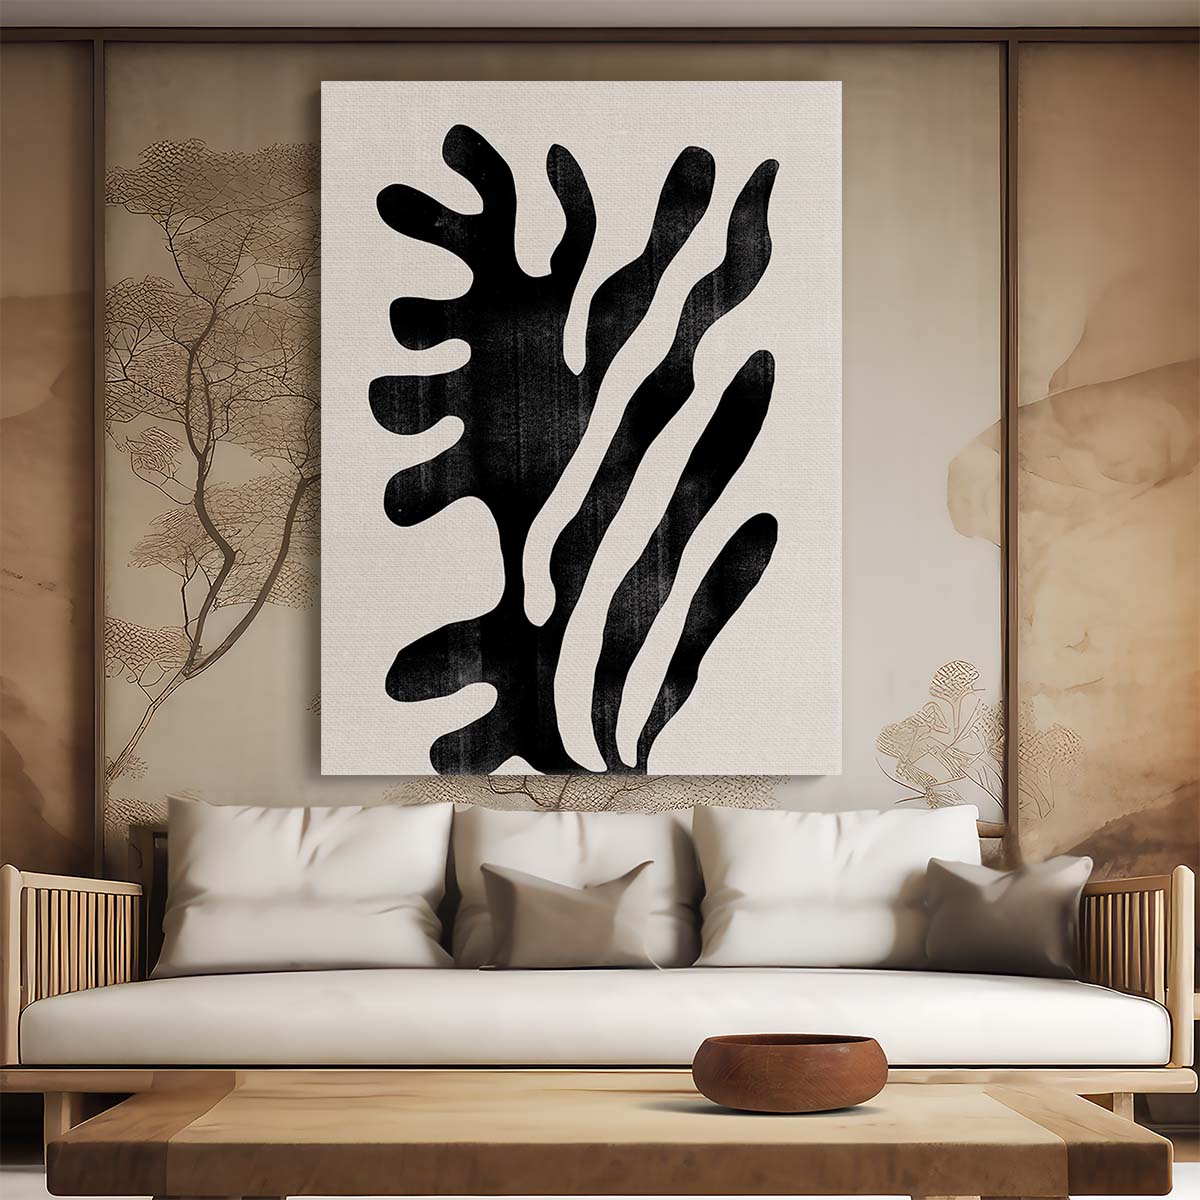 Mid-Century Abstract Organic Sea-Weed Illustration Art by Miuus Studio by Luxuriance Designs, made in USA